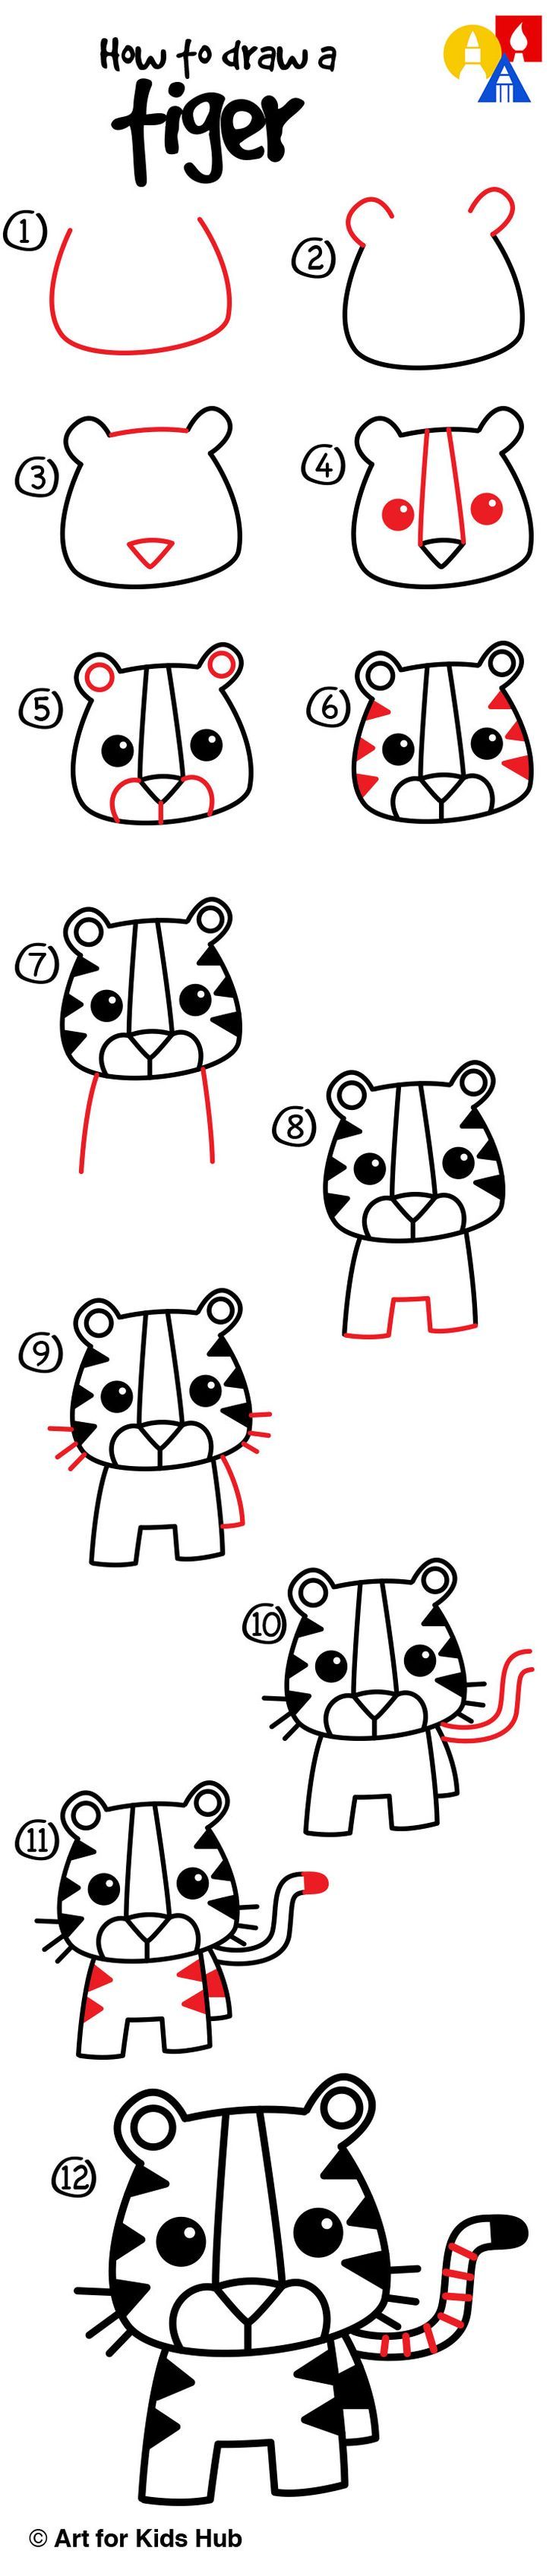 How to draw a cartoon tiger just for kids